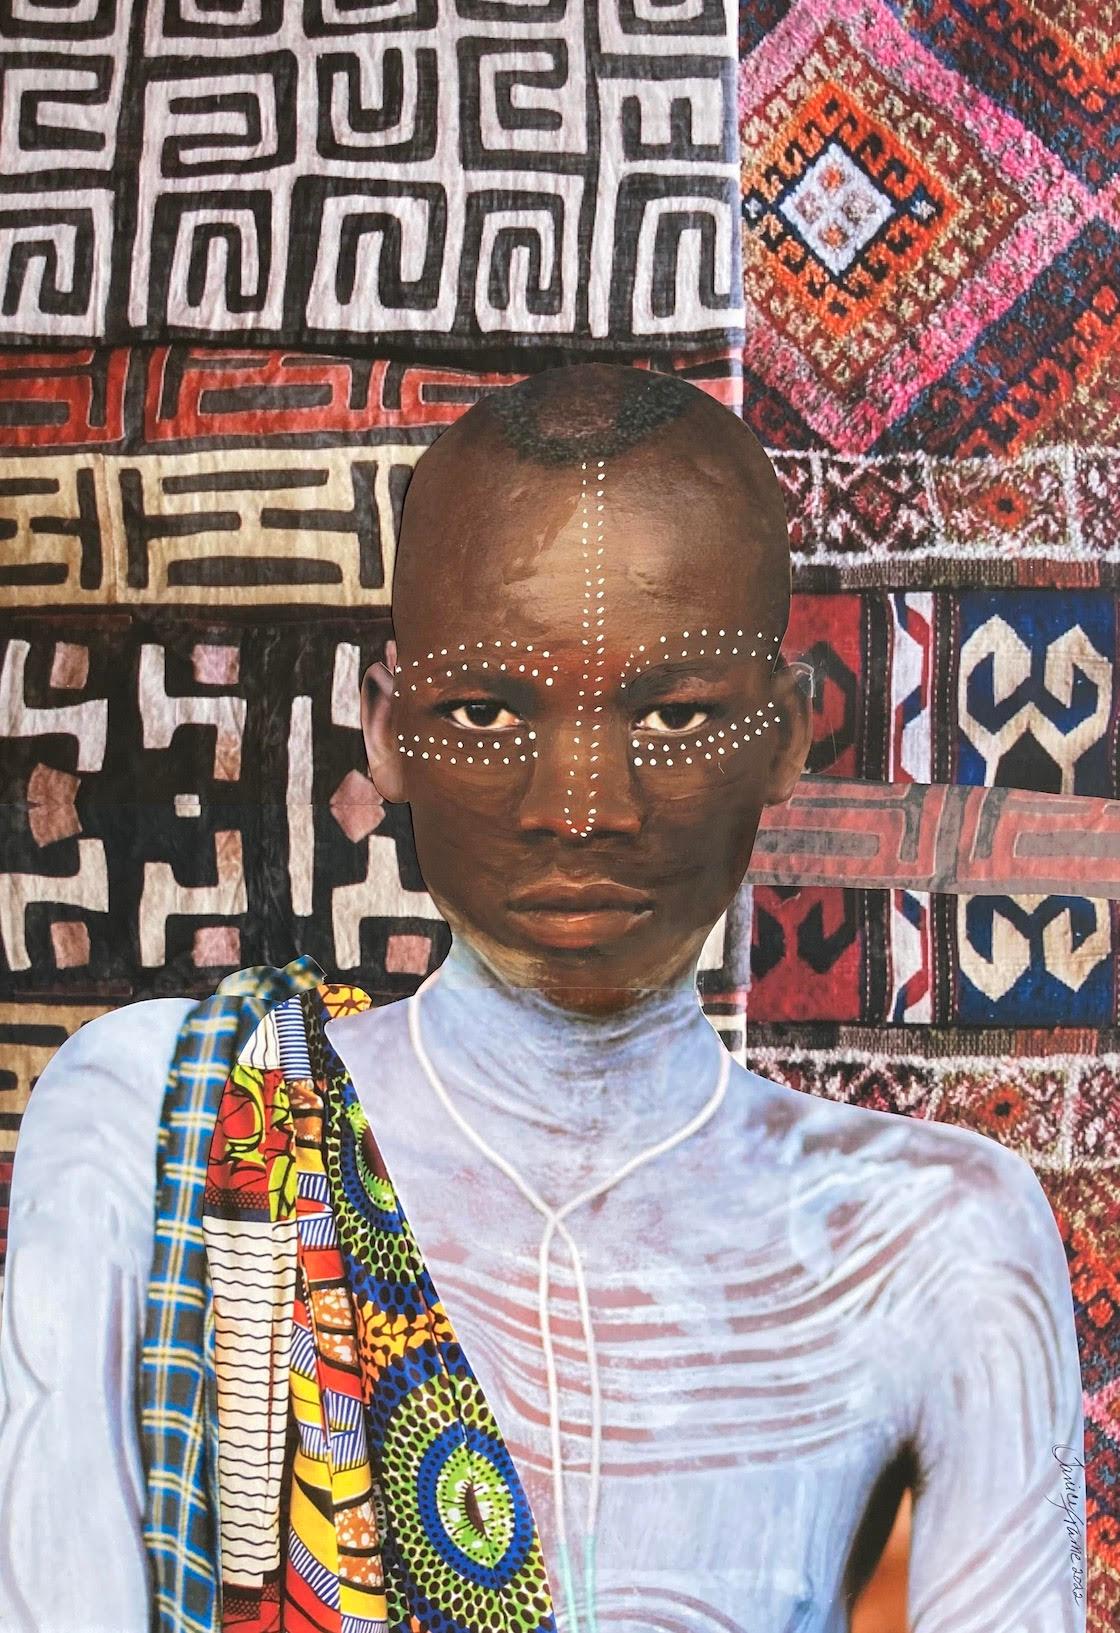 Janice Frame Figurative Painting - "Goat Herder" mixed media portrait of African boy with graphic patterns behind